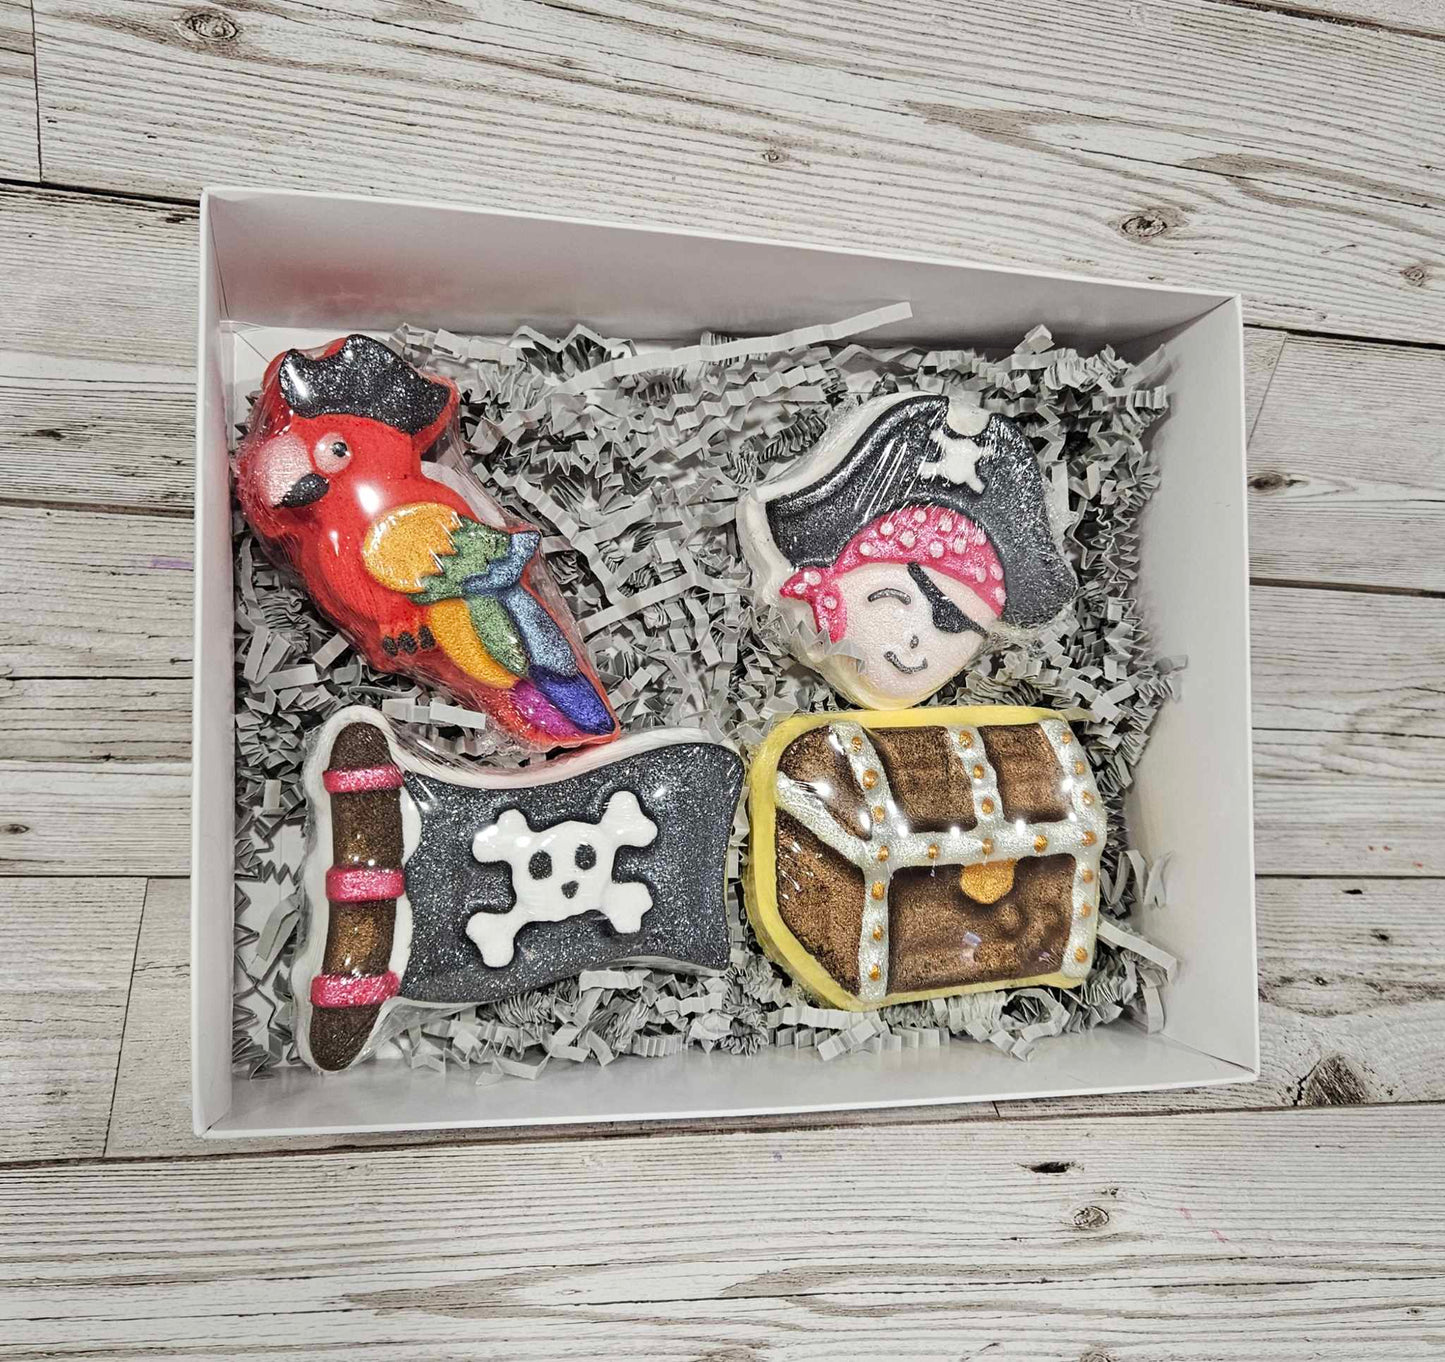 'Ahoy there Pirate' Bath Bomb Gift Set